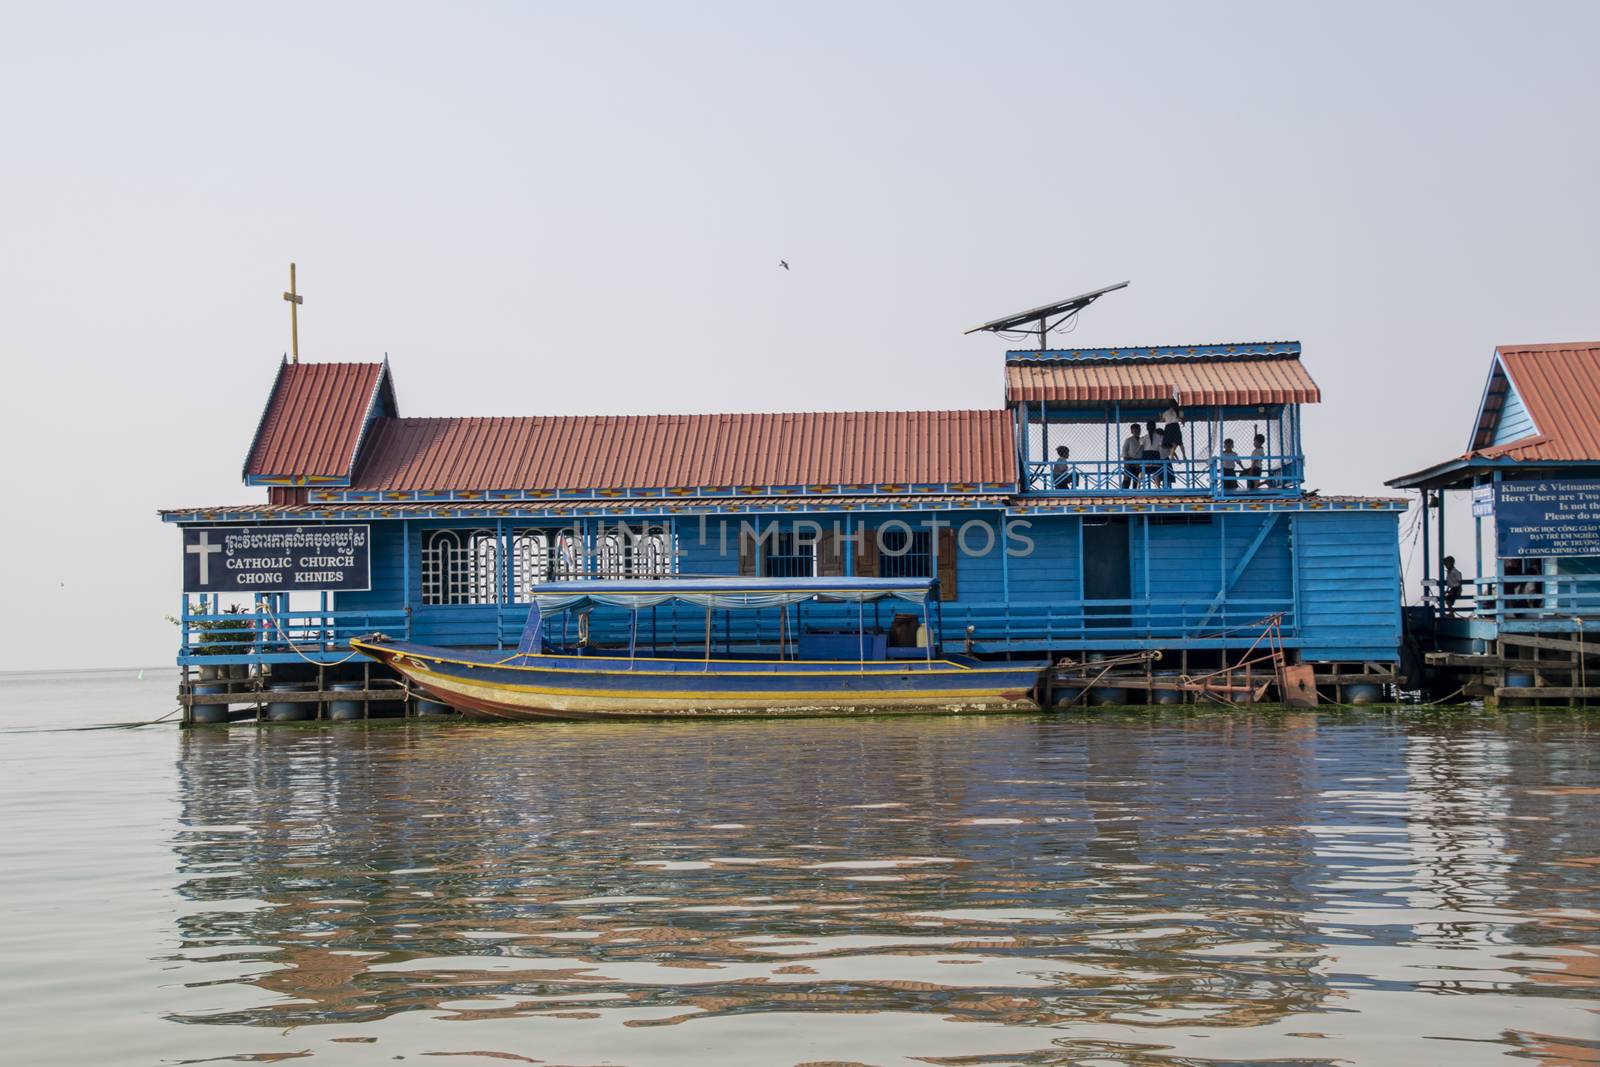 Cambodia, Tonle Sap Floating Village - March 2016: Children playing on the deck of this floating Church which doubles as a school house